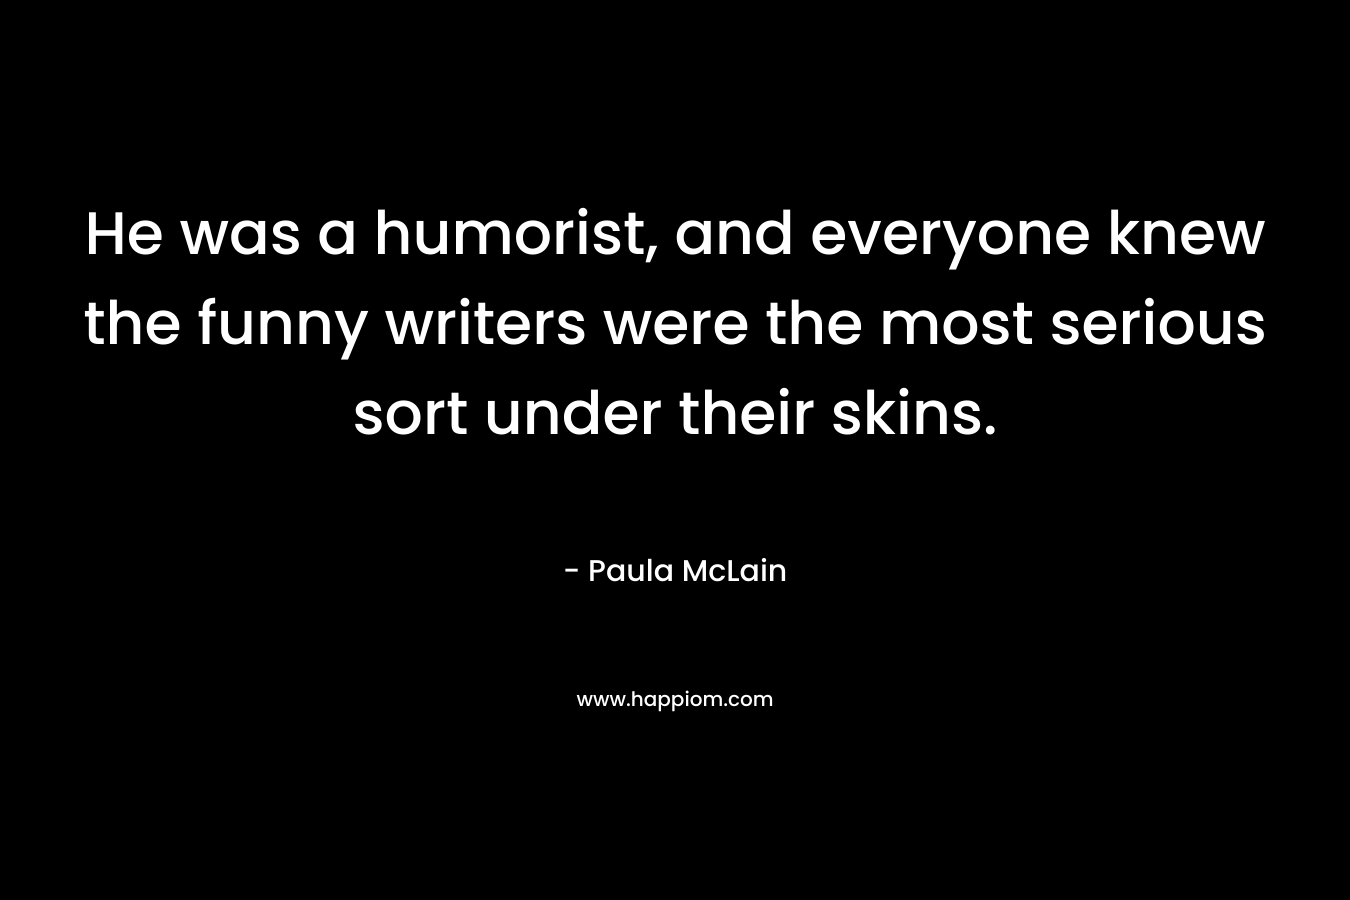 He was a humorist, and everyone knew the funny writers were the most serious sort under their skins.